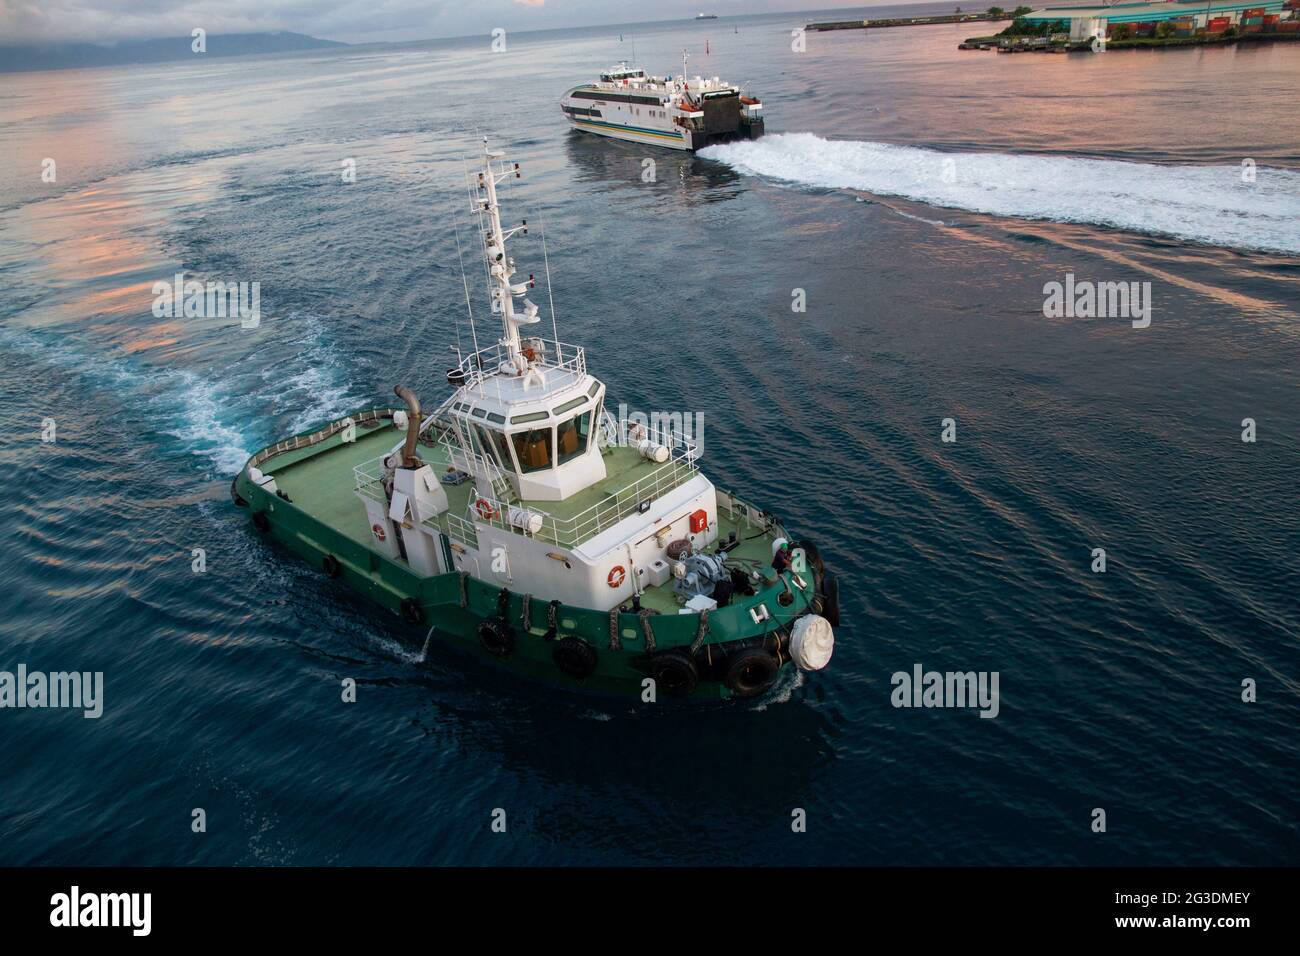 Tug boat and ship on the harbour, French Polynesia. Stock Photo